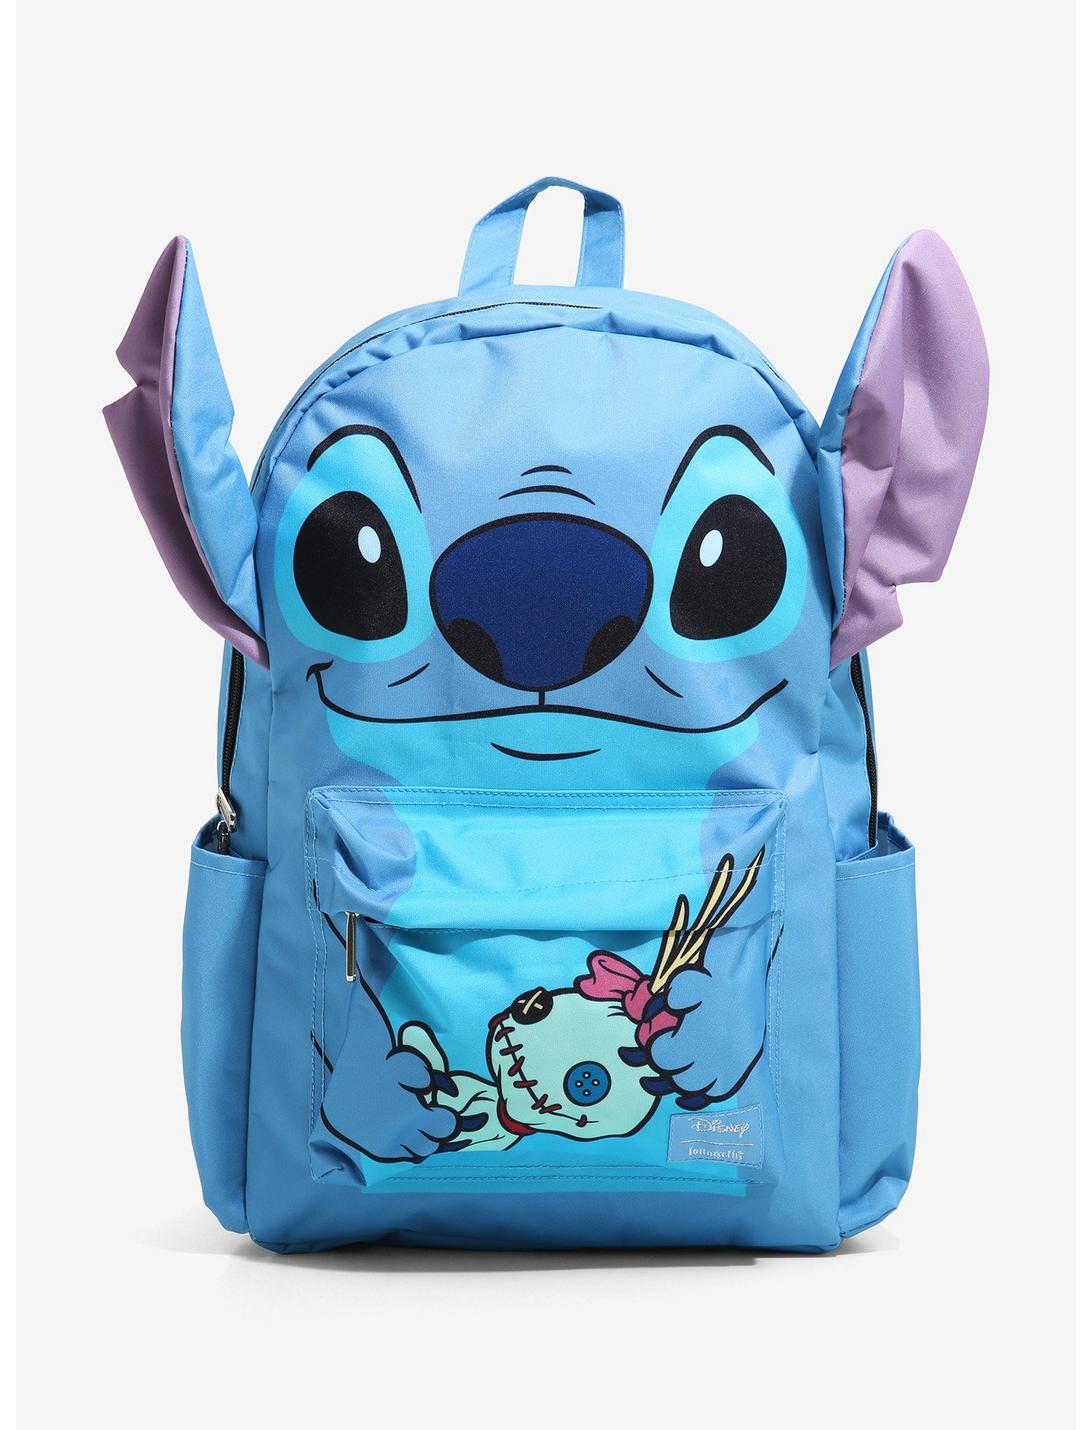 Loungefly Disney Lilo & Stitch Stitch & Scrump Character Backpack, , hi-res